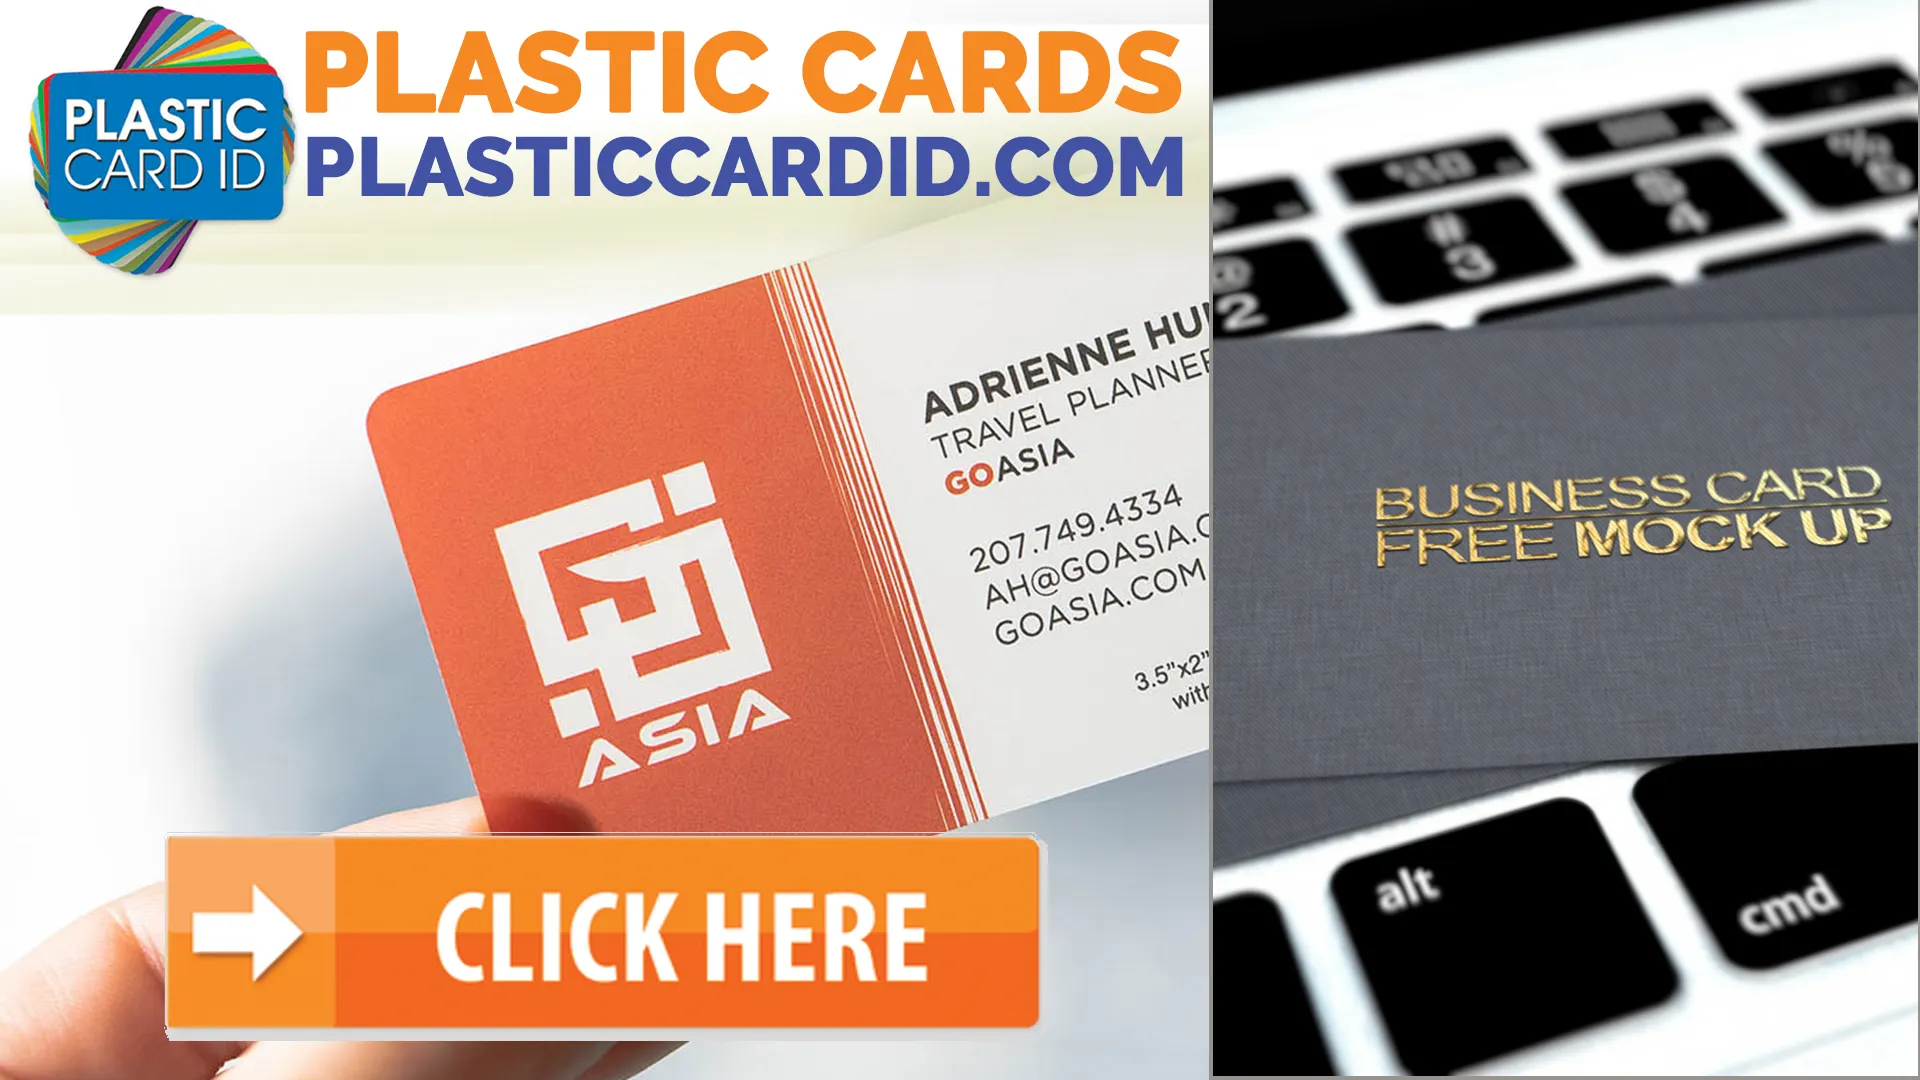 Welcome to the World of High-Quality Plastic Cards at Plastic Card ID




